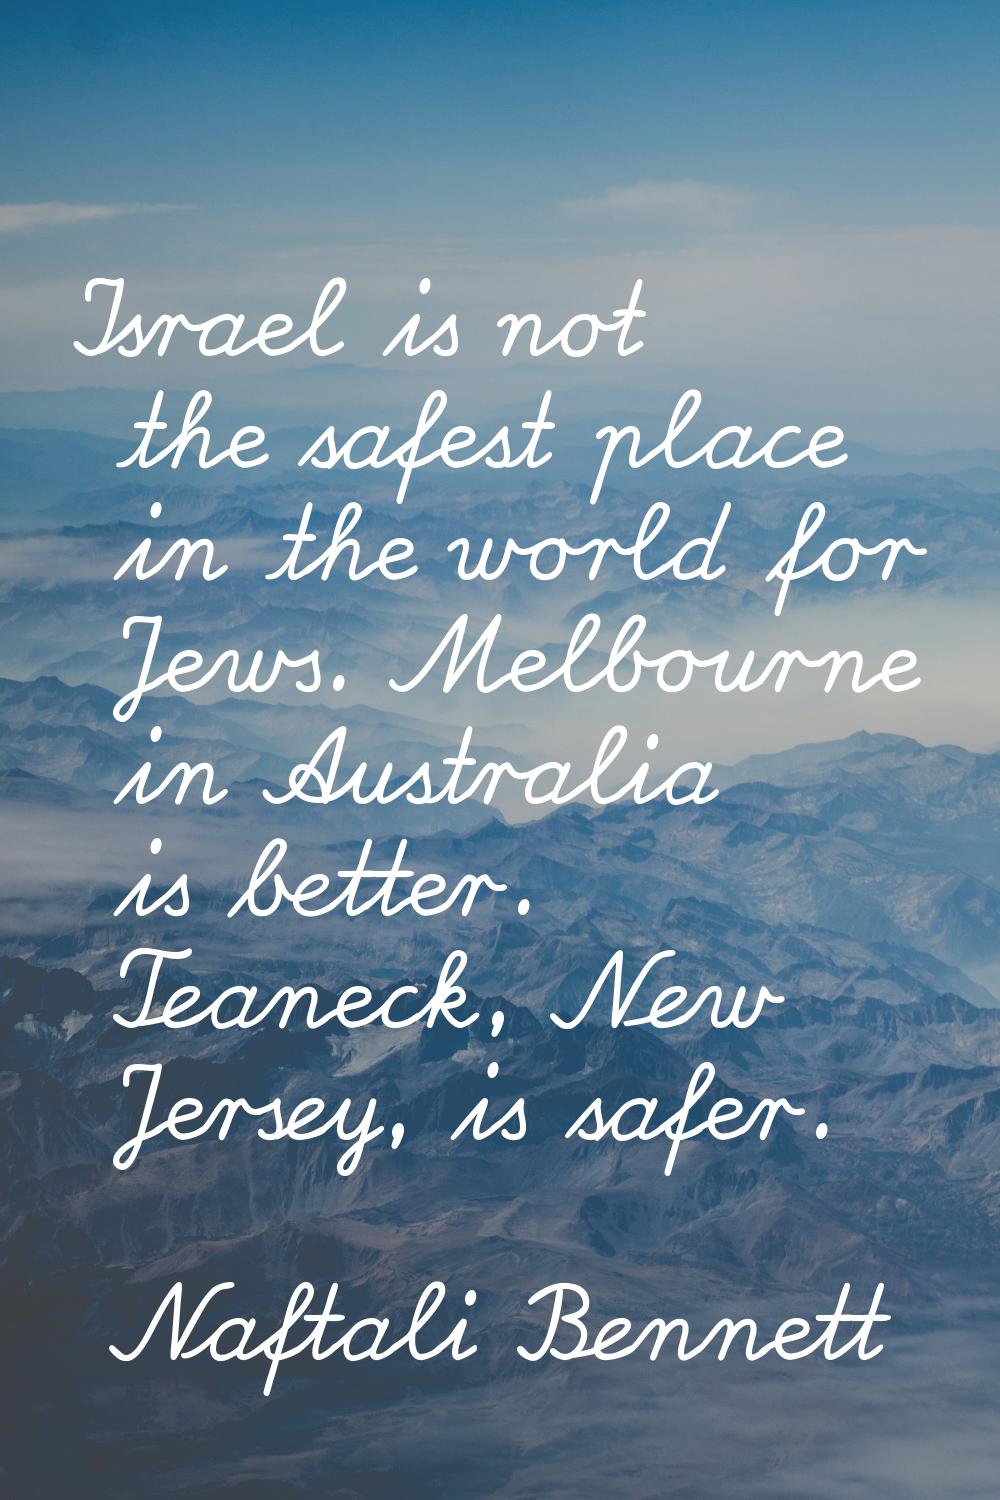 Israel is not the safest place in the world for Jews. Melbourne in Australia is better. Teaneck, Ne